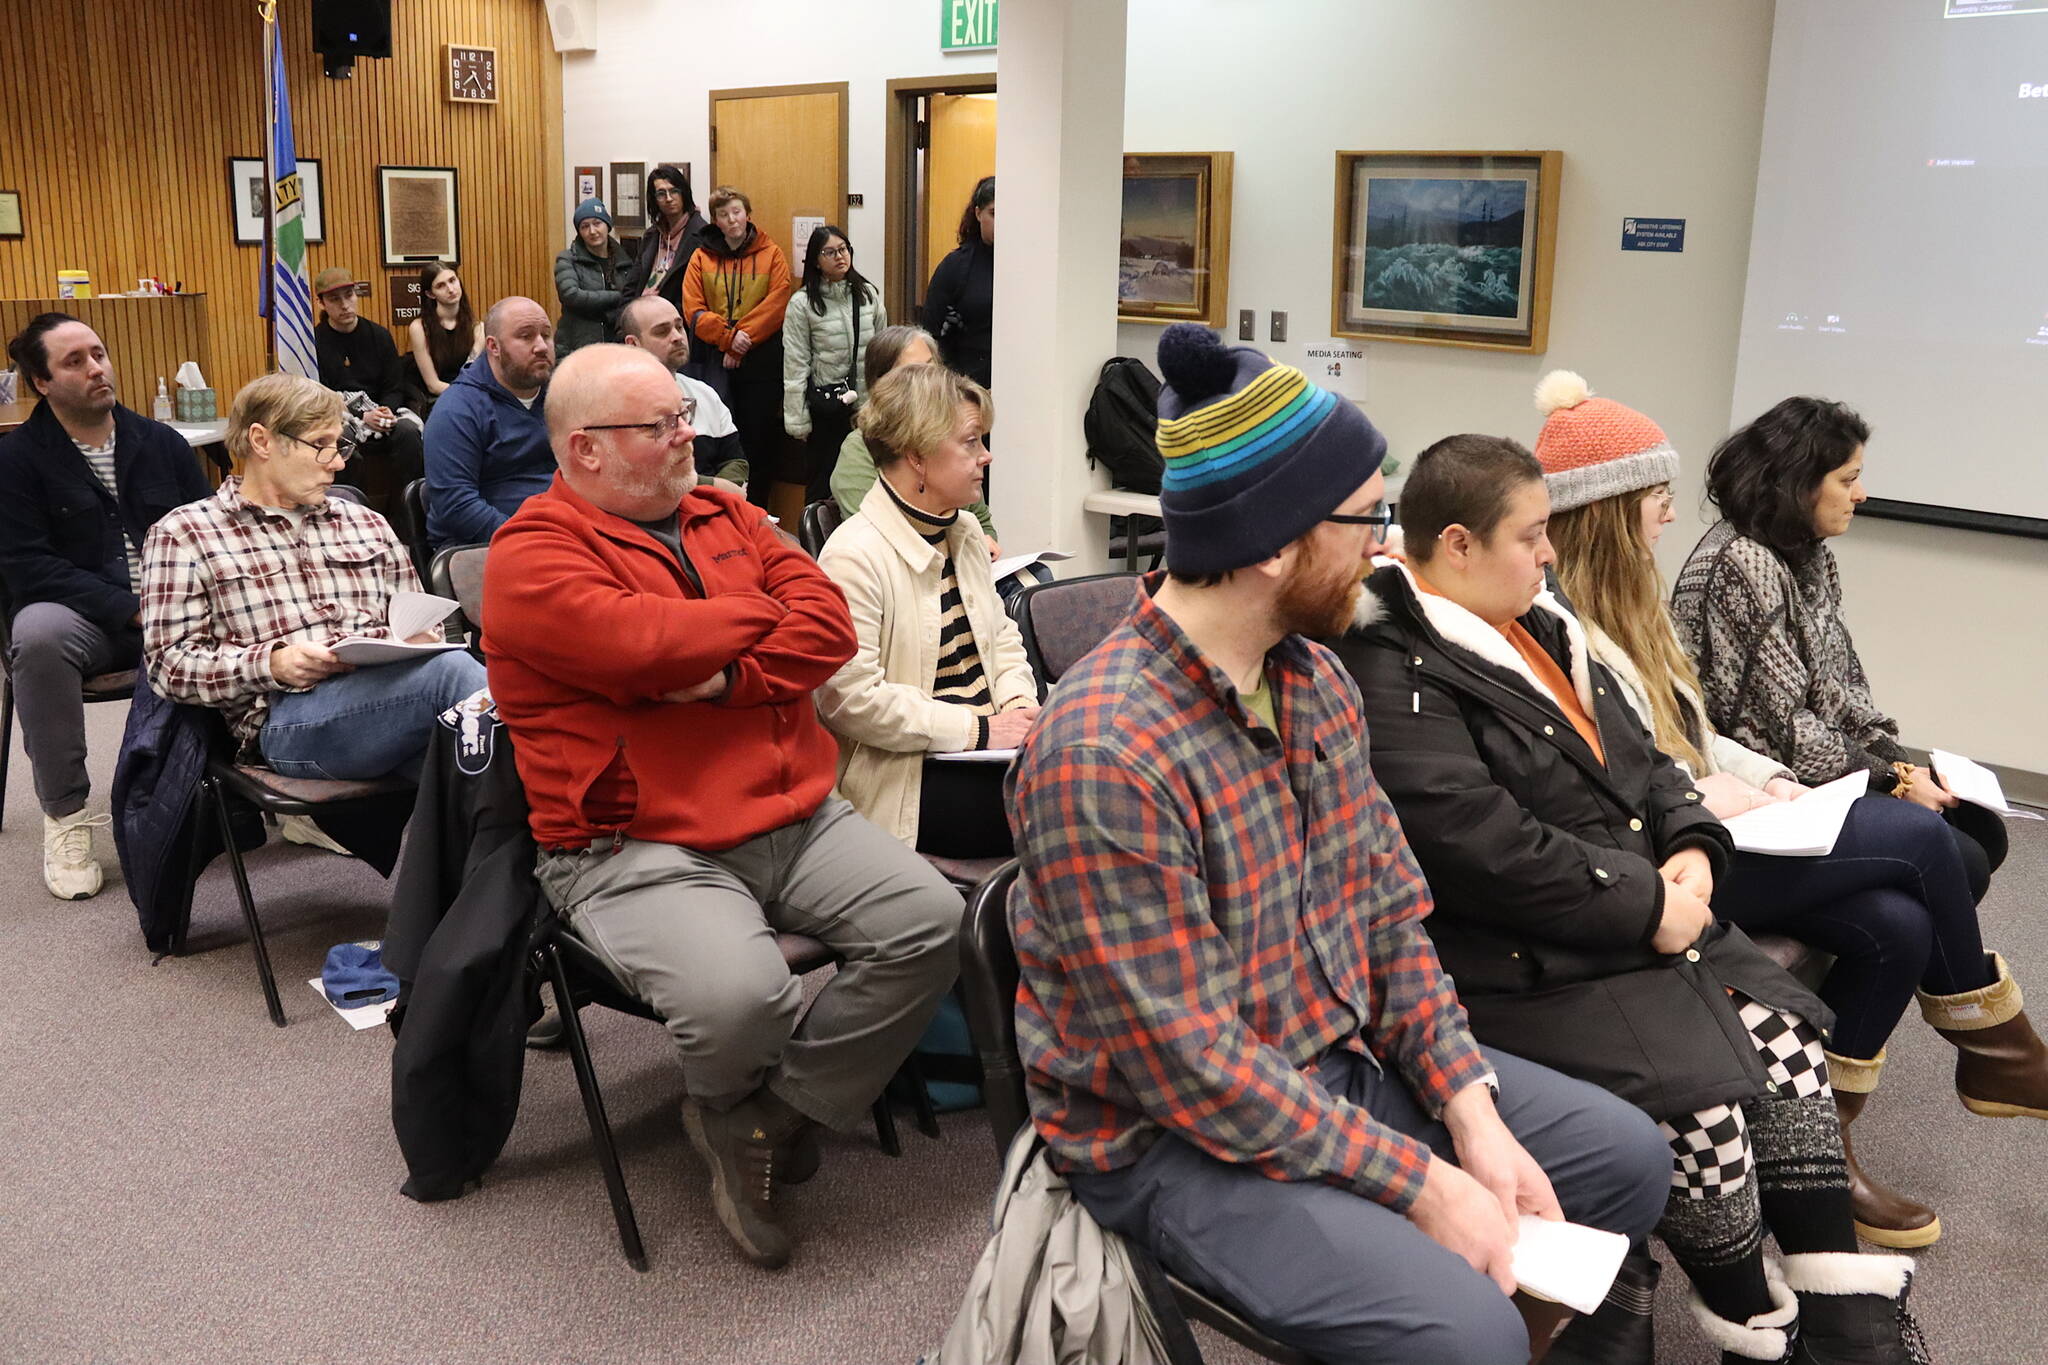 About 15 members of the group Juneau for Palestine are among the residents showing up the public testimony portion of a Juneau Assembly meeting on Feb. 5. Members of the group also attended Monday’s Assembly meeting to reiterate their call for a resolution seeking a ceasefire in Gaza.(Mark Sabbatini / Juneau Empire file photo)